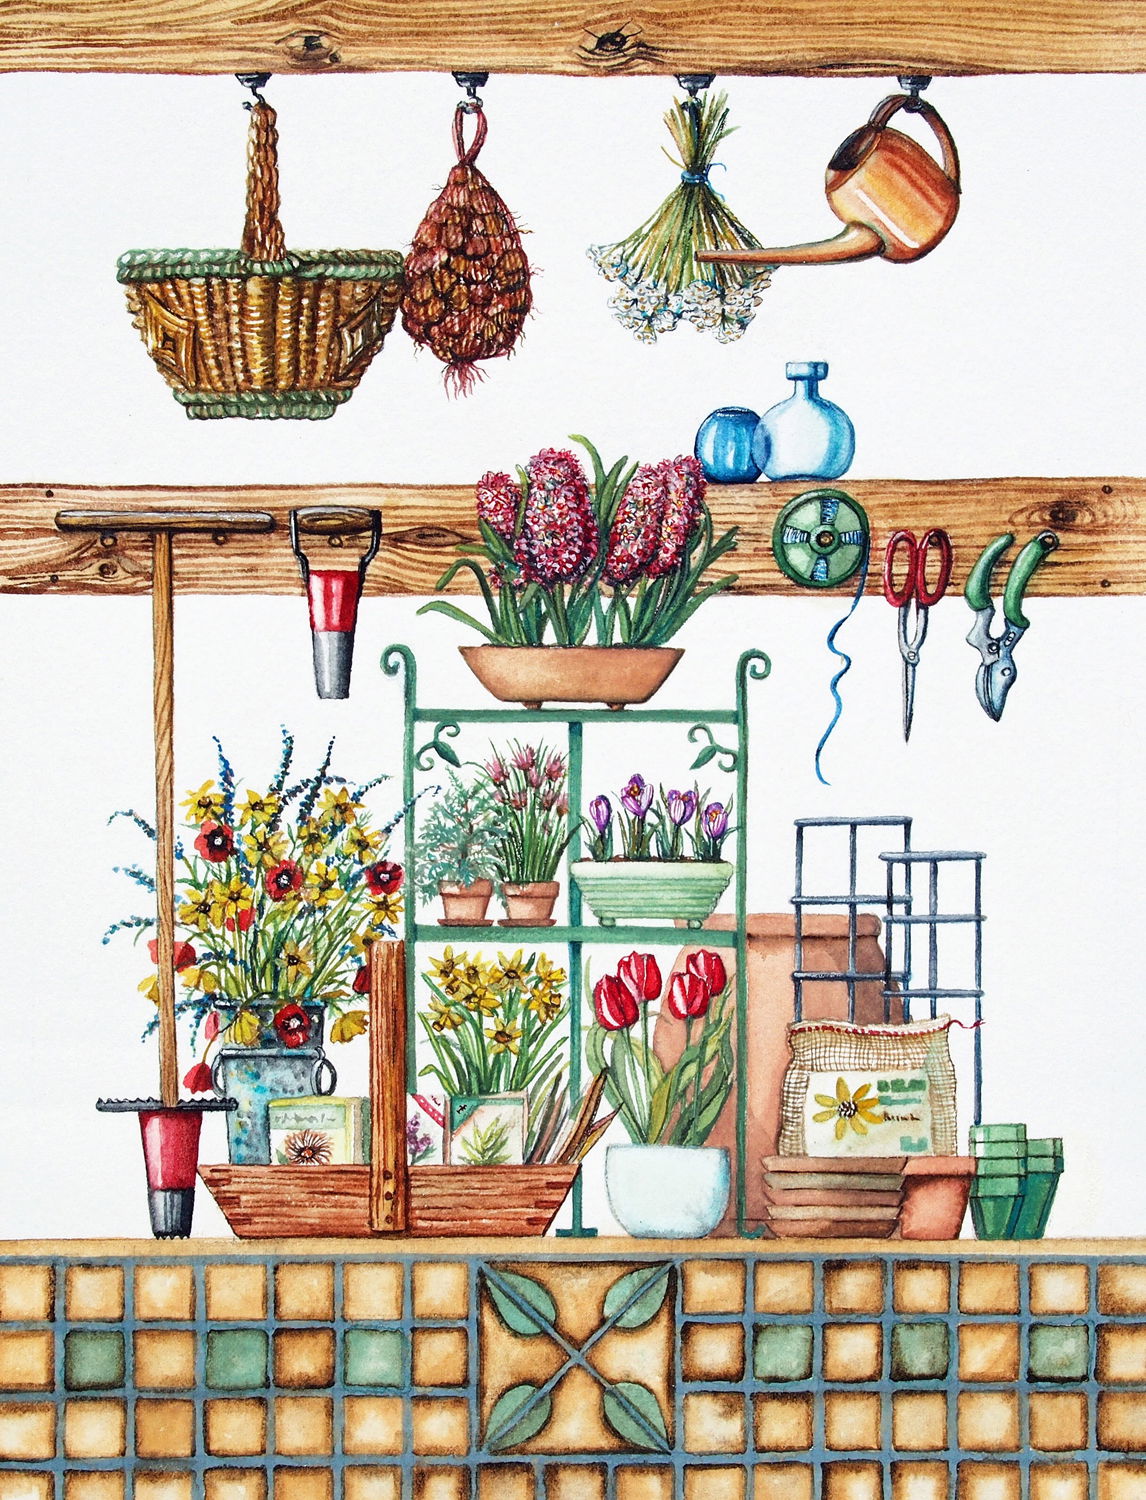 Garden Shed Series with Spring Bulbs